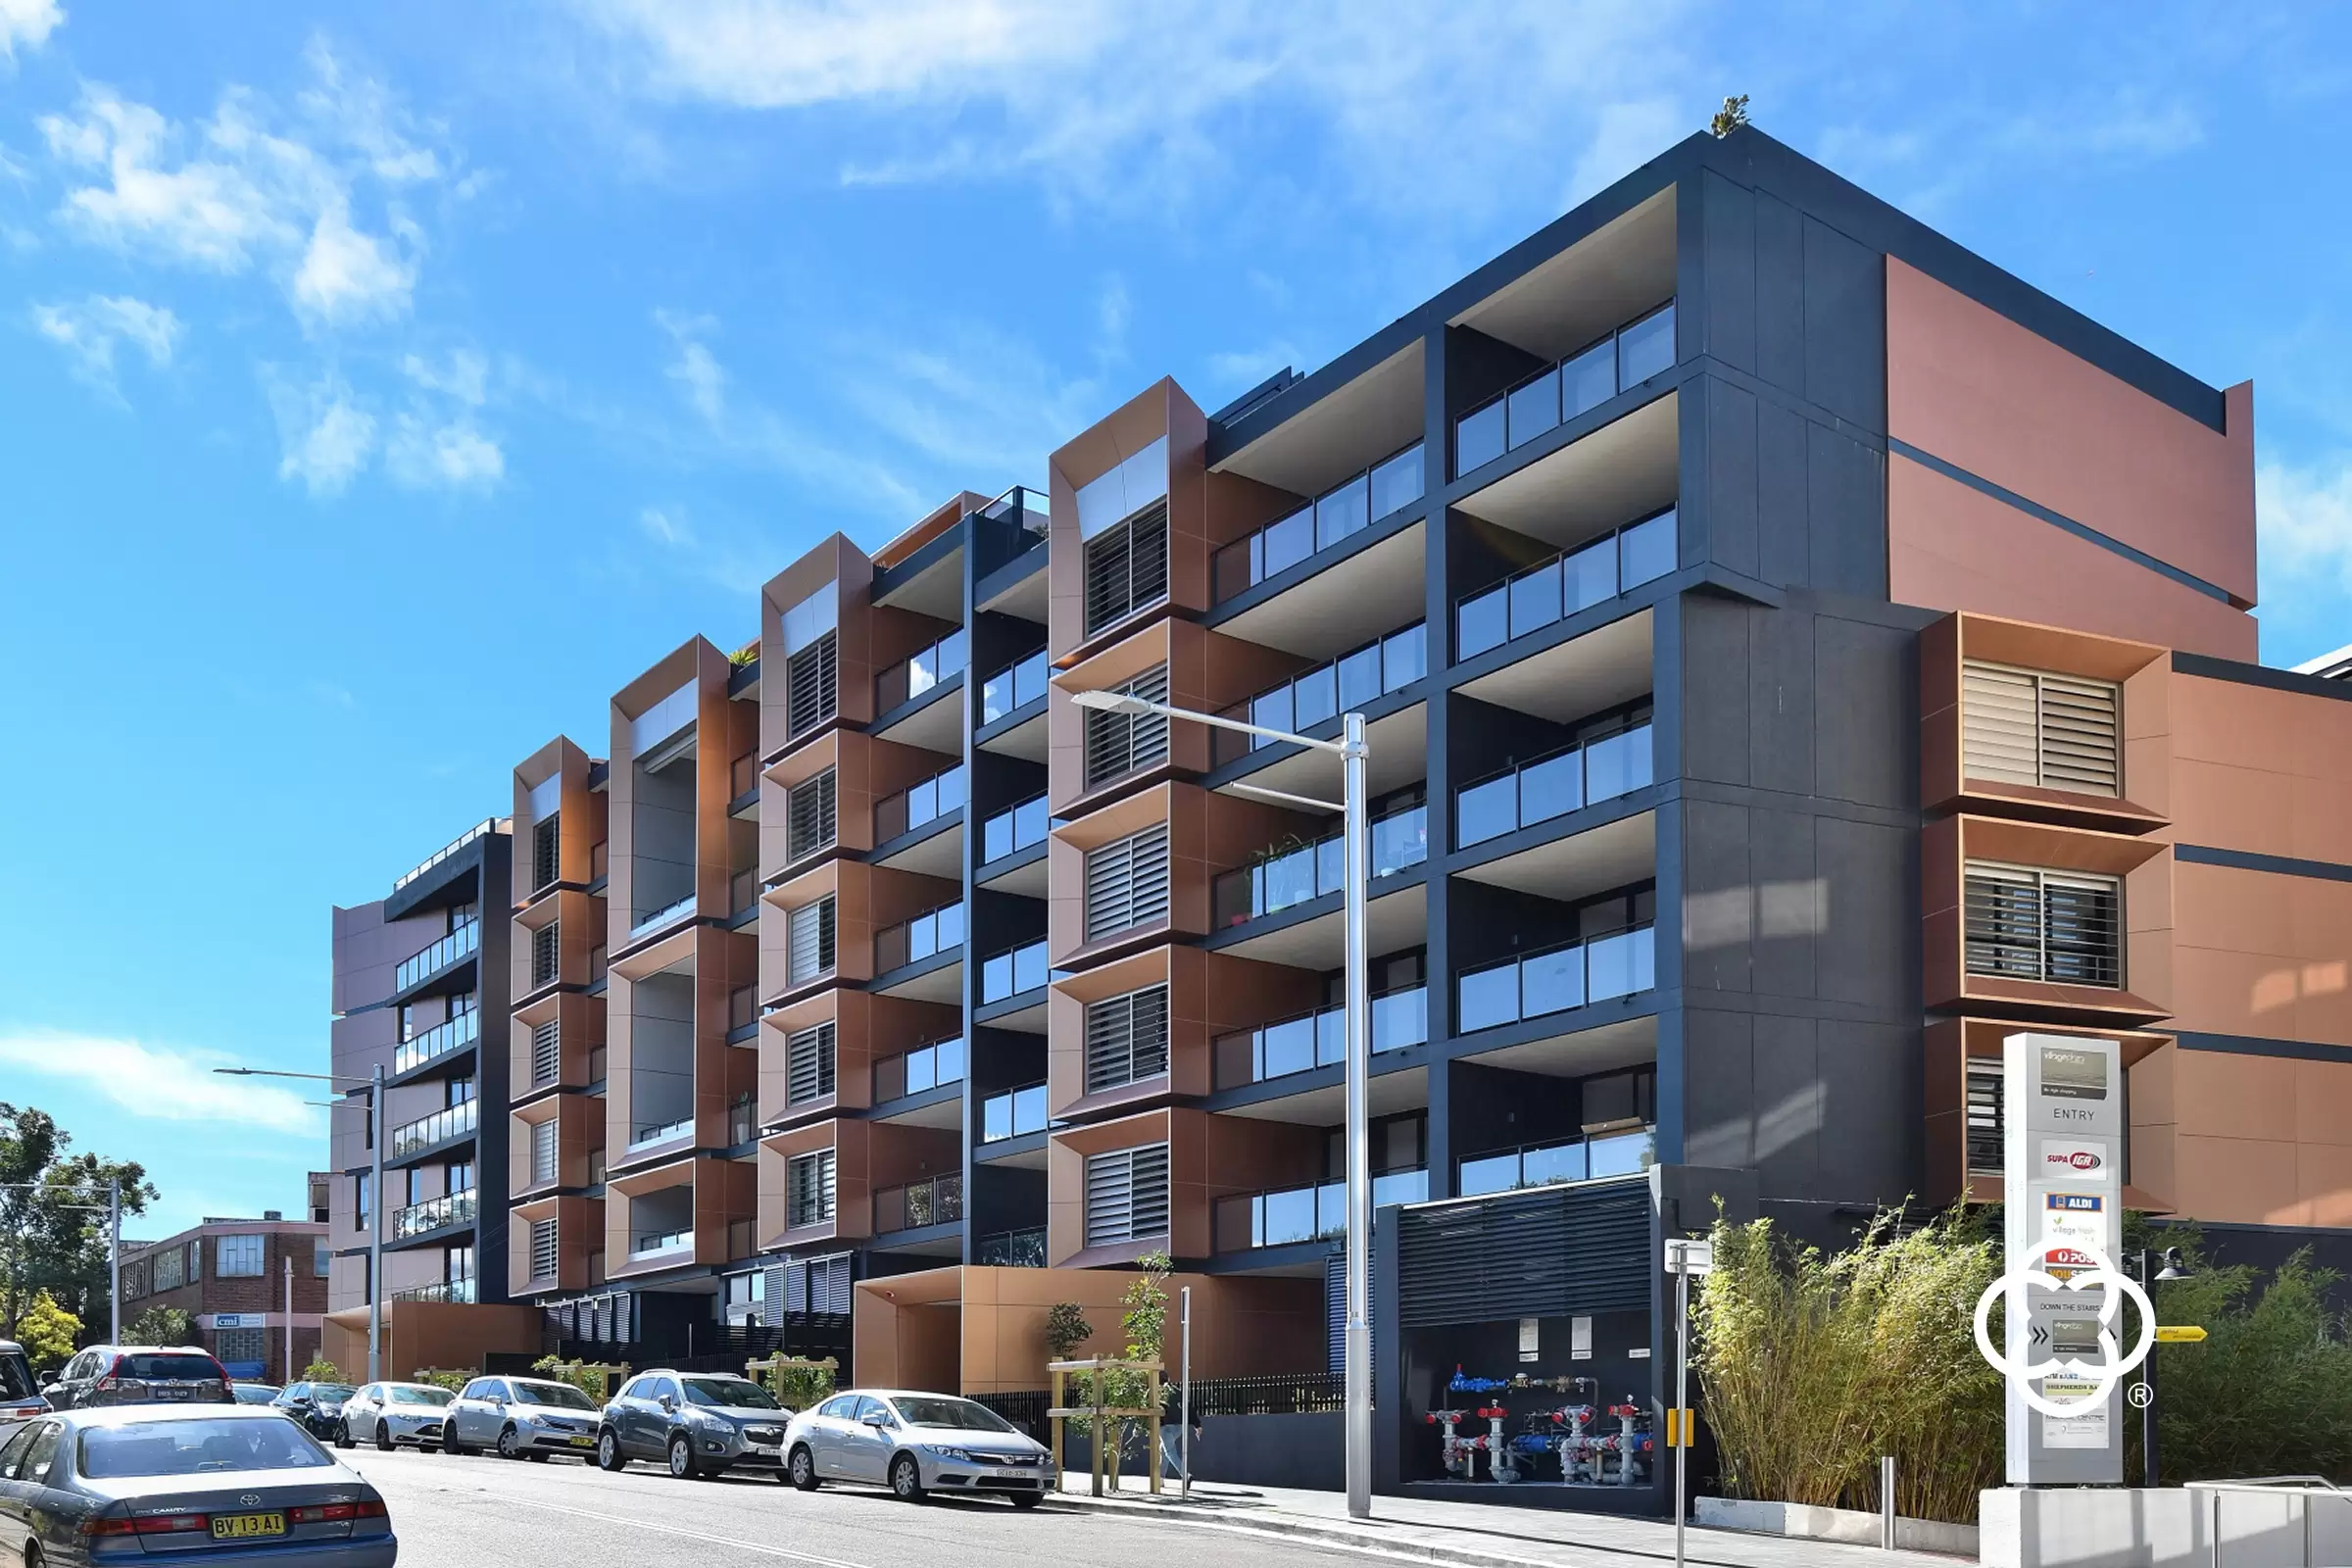 50/21 Bay Drive, Meadowbank Leased by Chidiac Realty - image 2